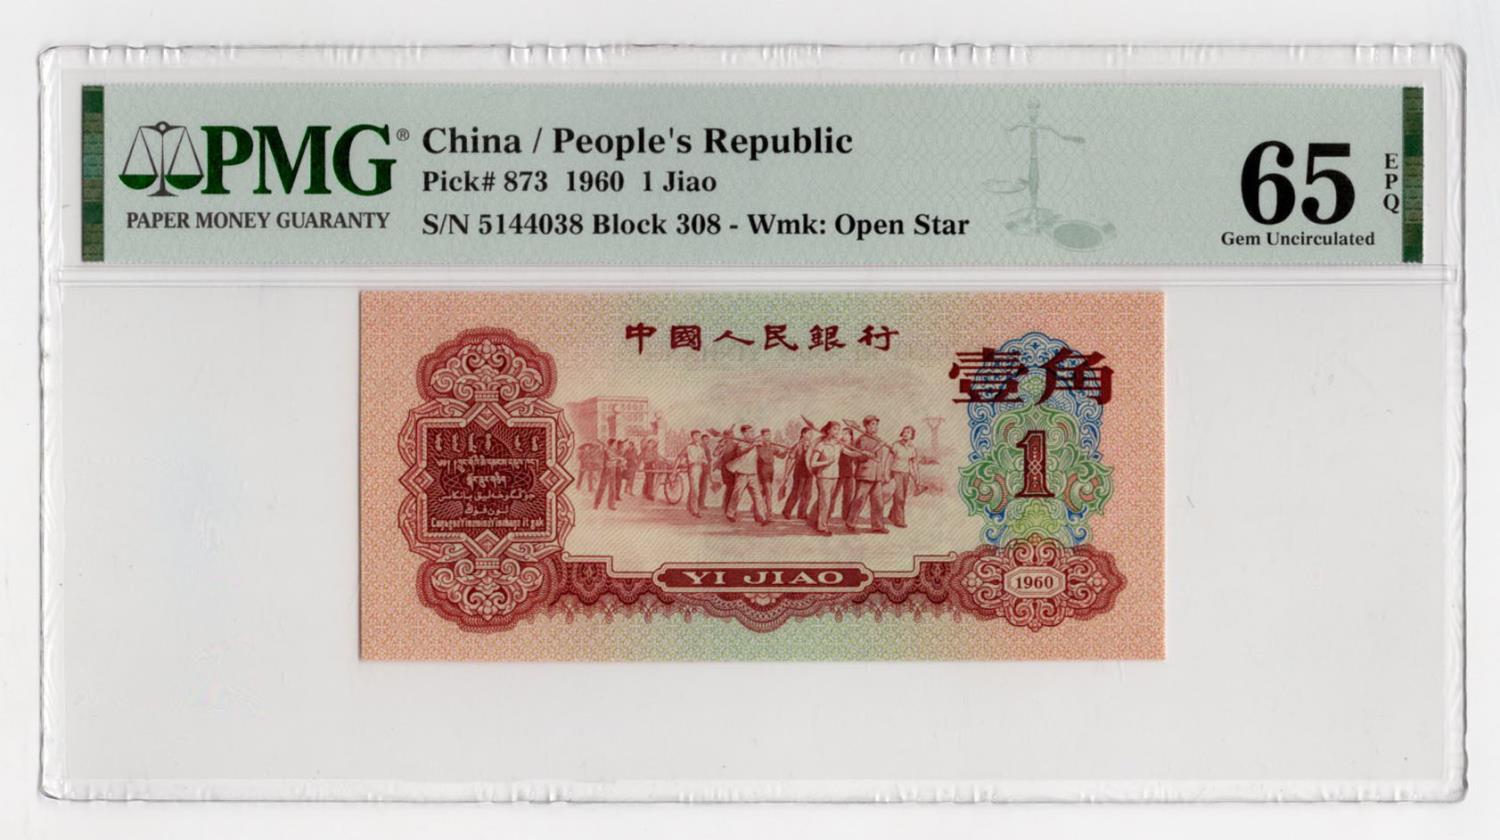 China Peoples Republic 1 Jiao dated 1960, block number 308, serial number 5144038 (BNB B4085a,